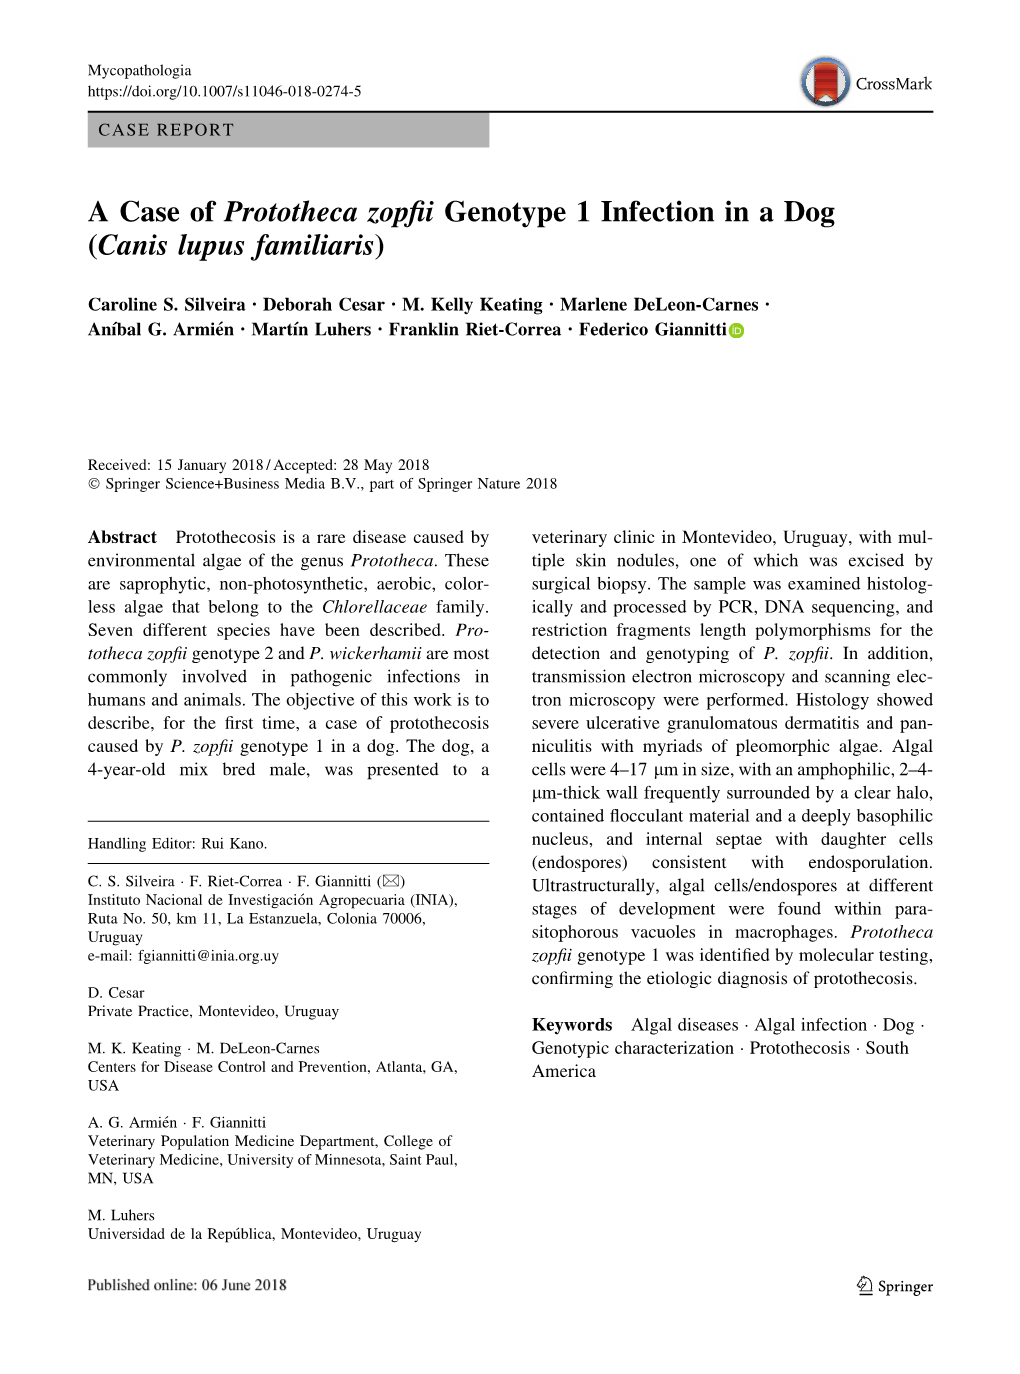 A Case of Prototheca Zopfii Genotype 1 Infection in a Dog (Canis Lupus